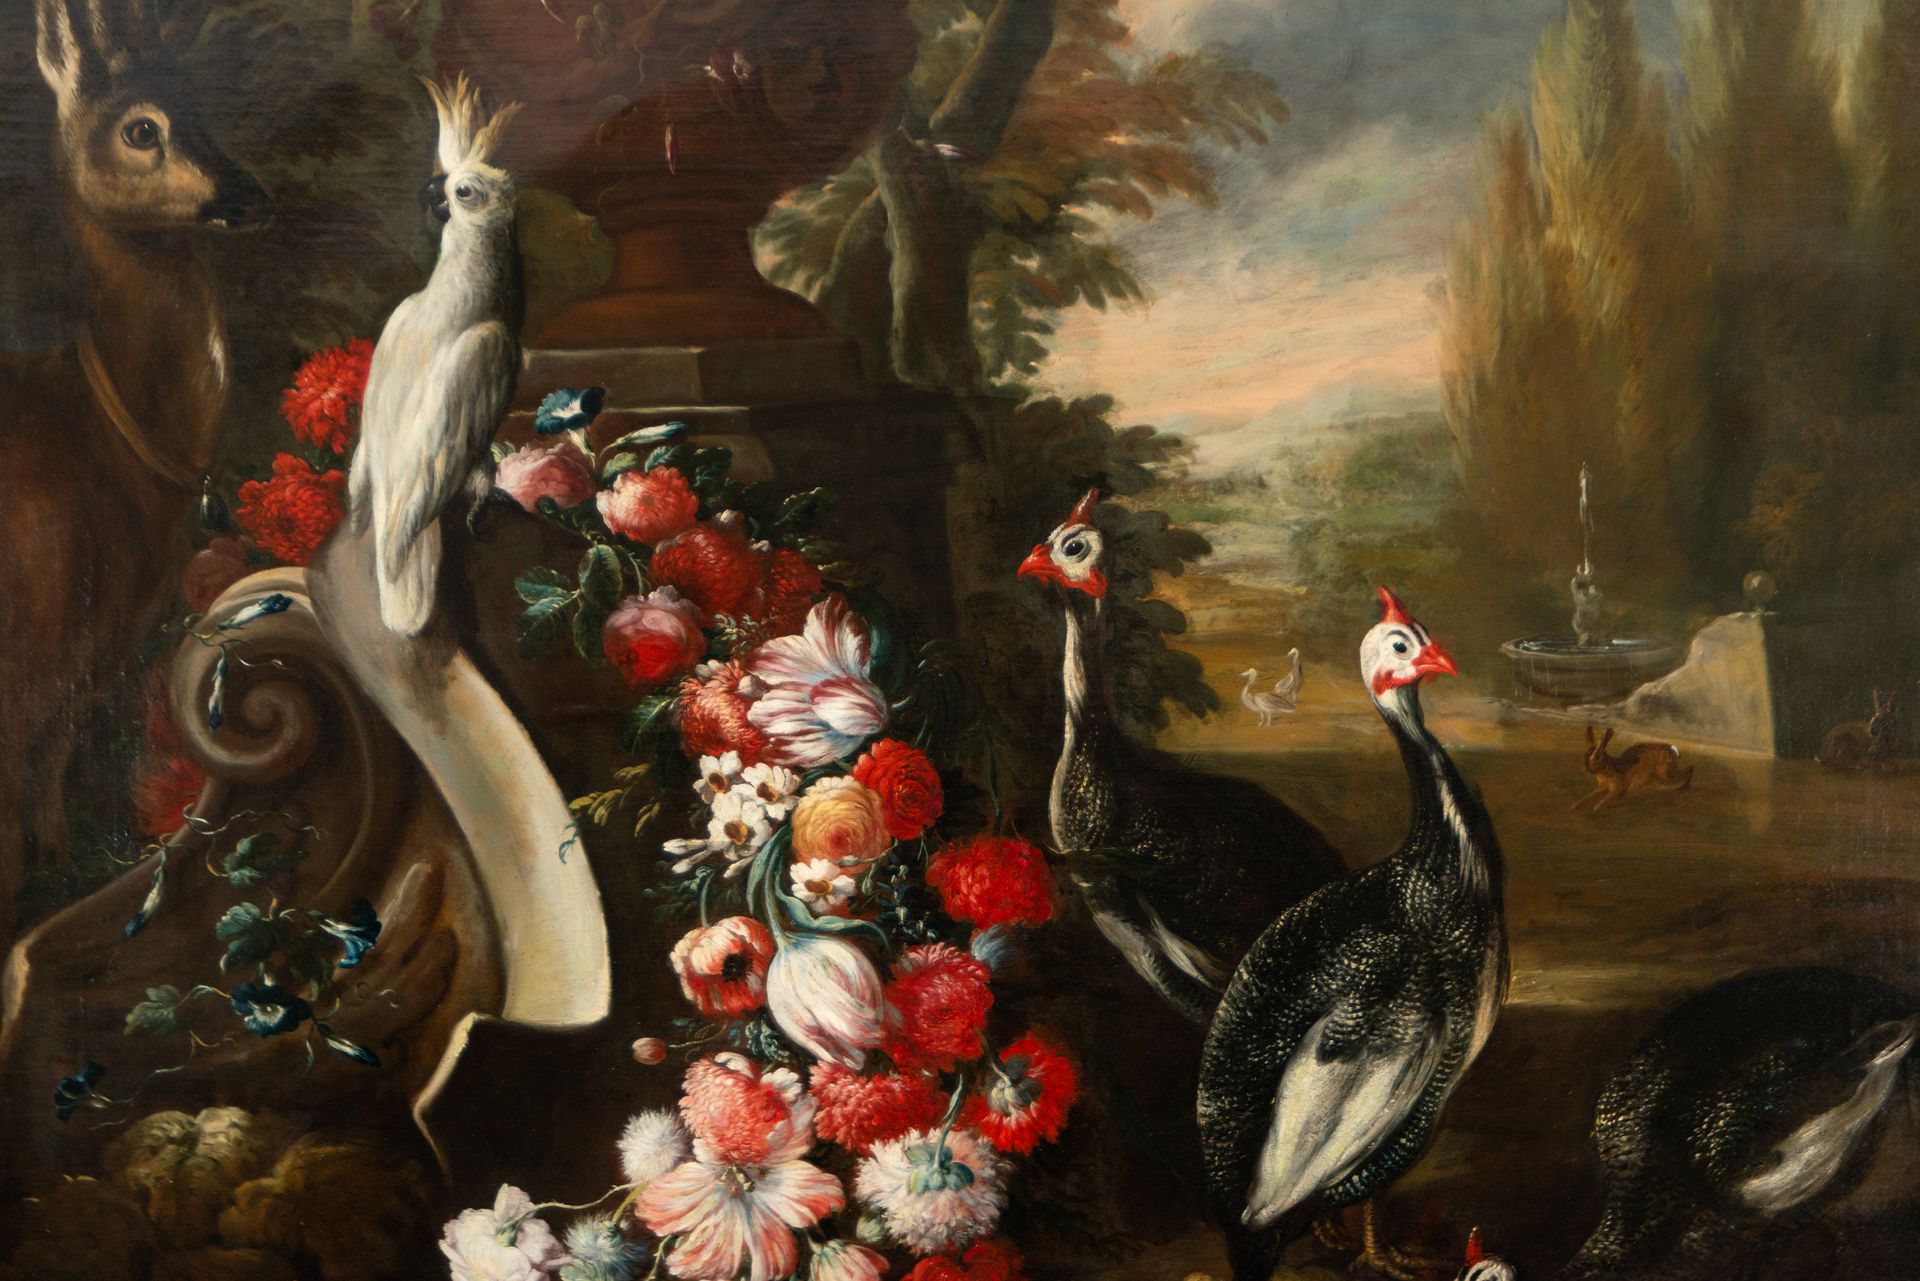 Large Pair of Still Lifes with Flowers and Birds in a Garden, 18th century Neapolitan school, Circle - Image 3 of 17